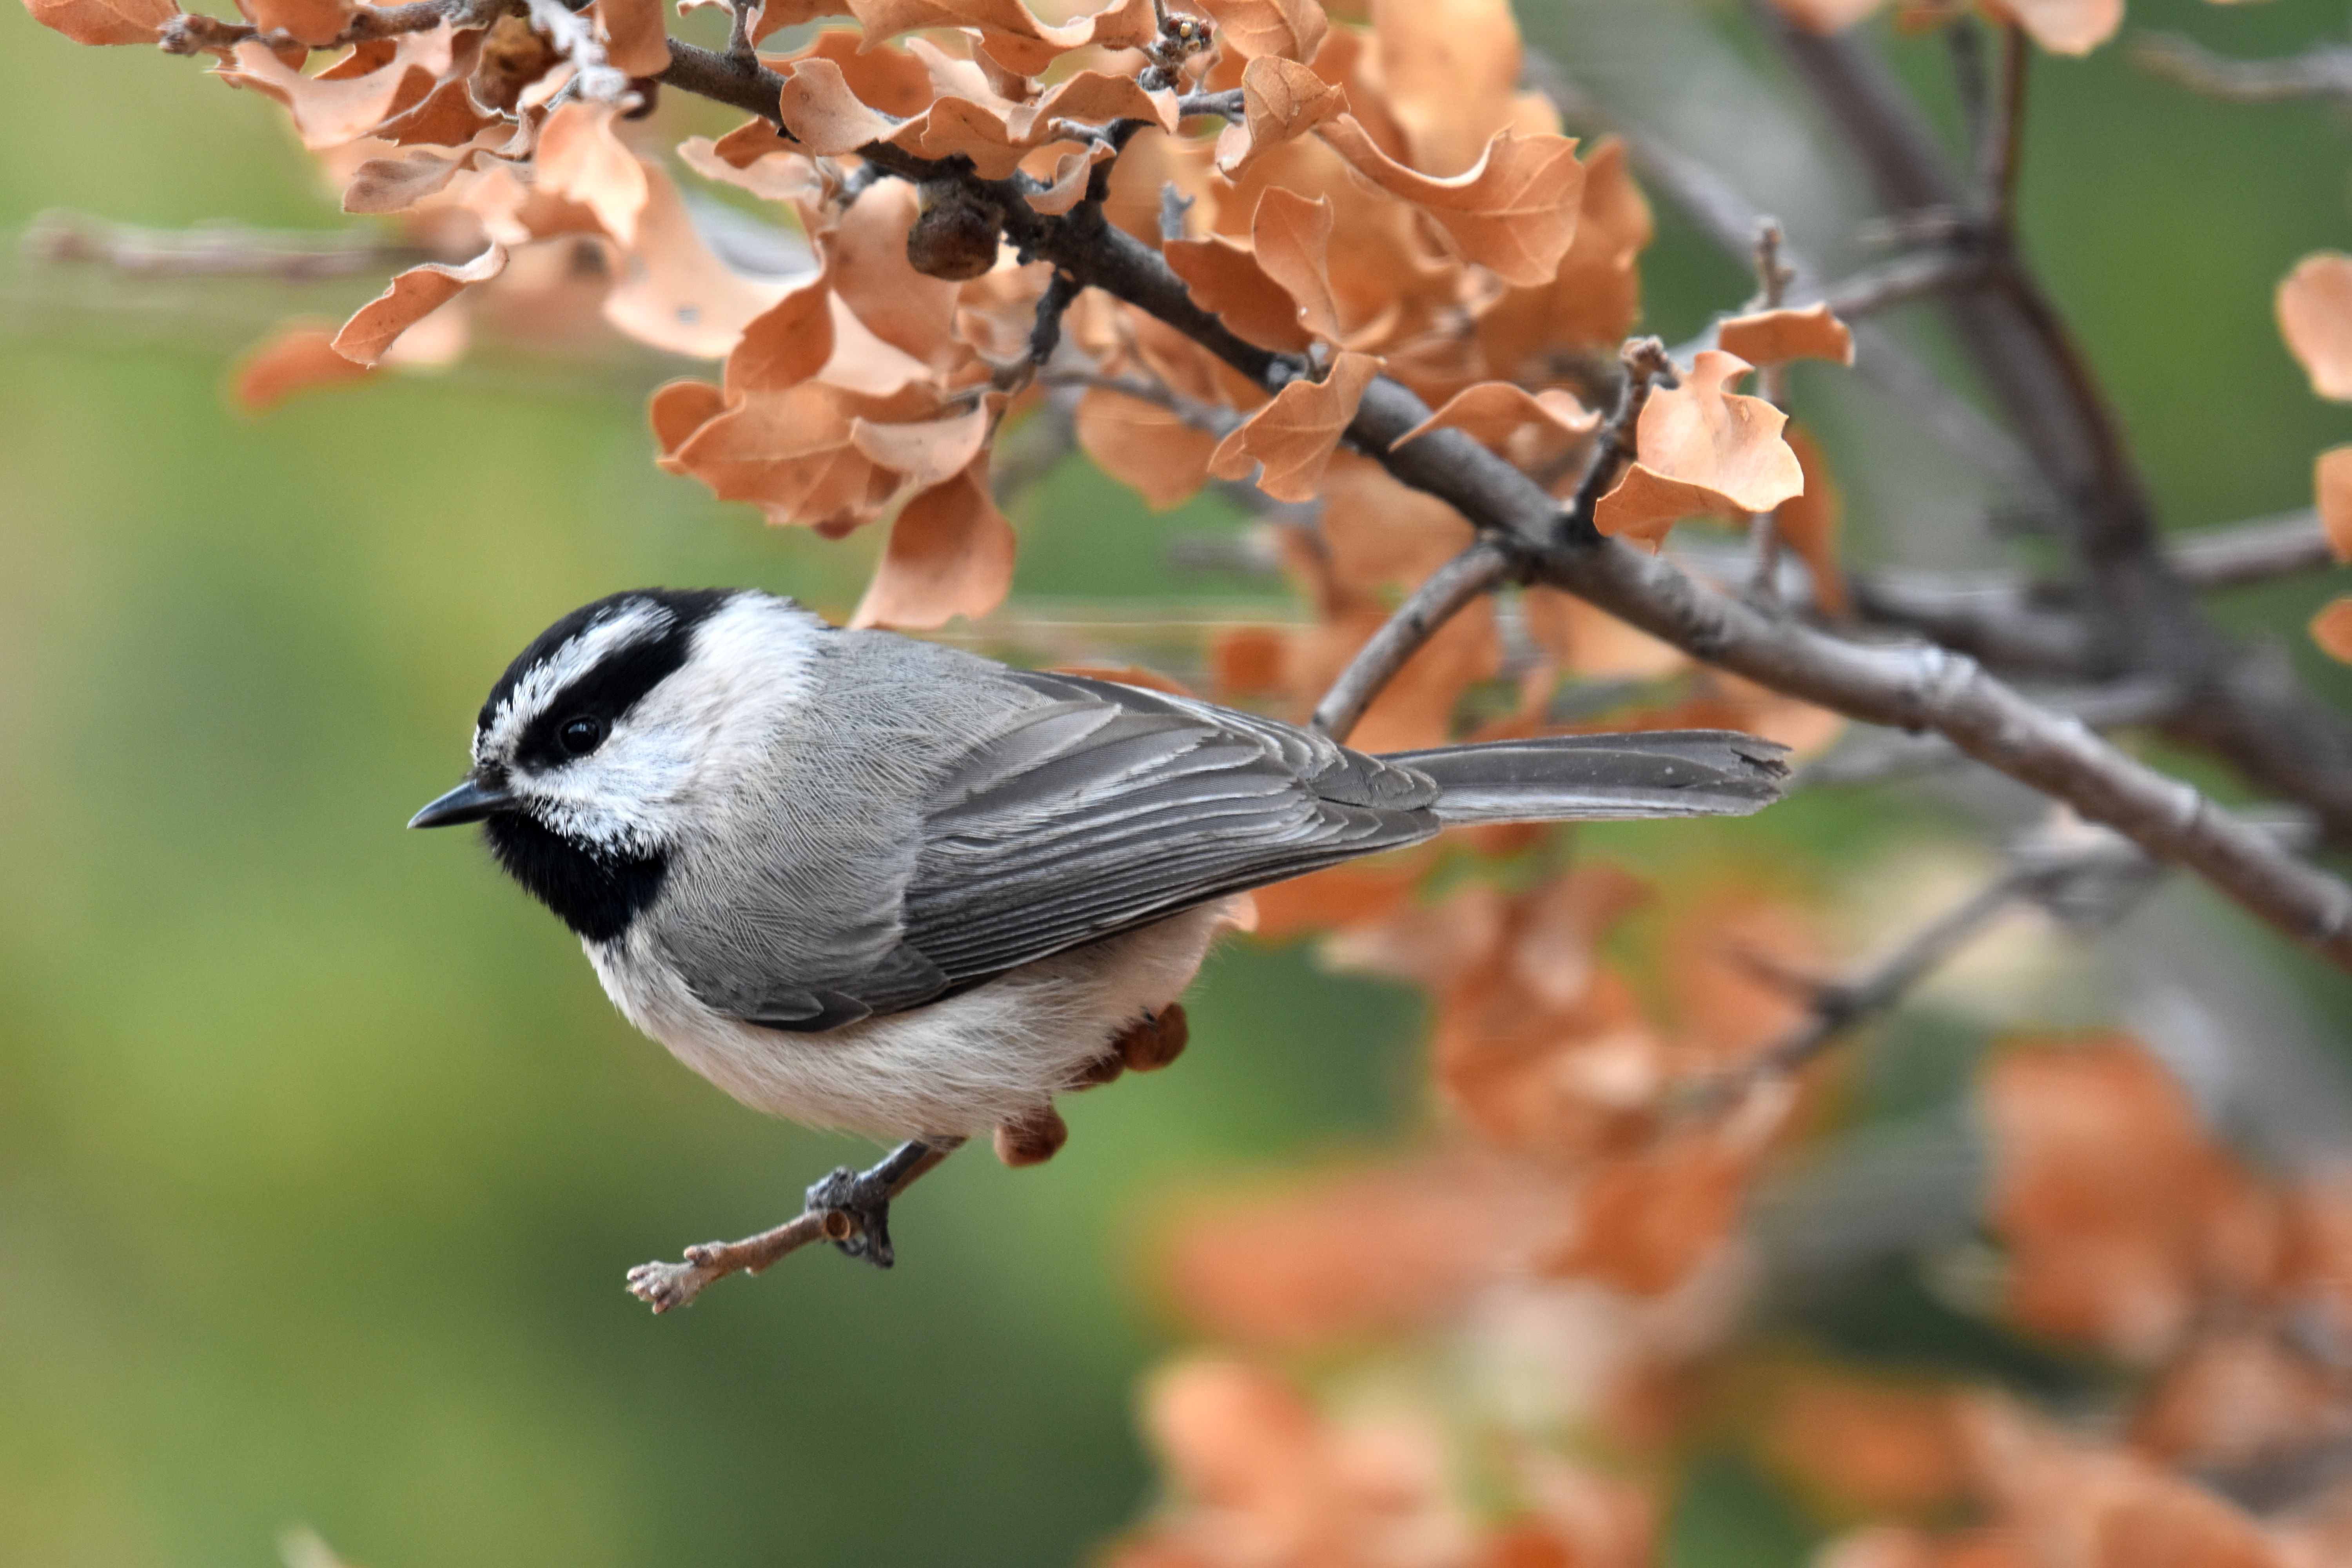 A small white, black and gray bird perched on a tiny branch in a tree with brown leaves